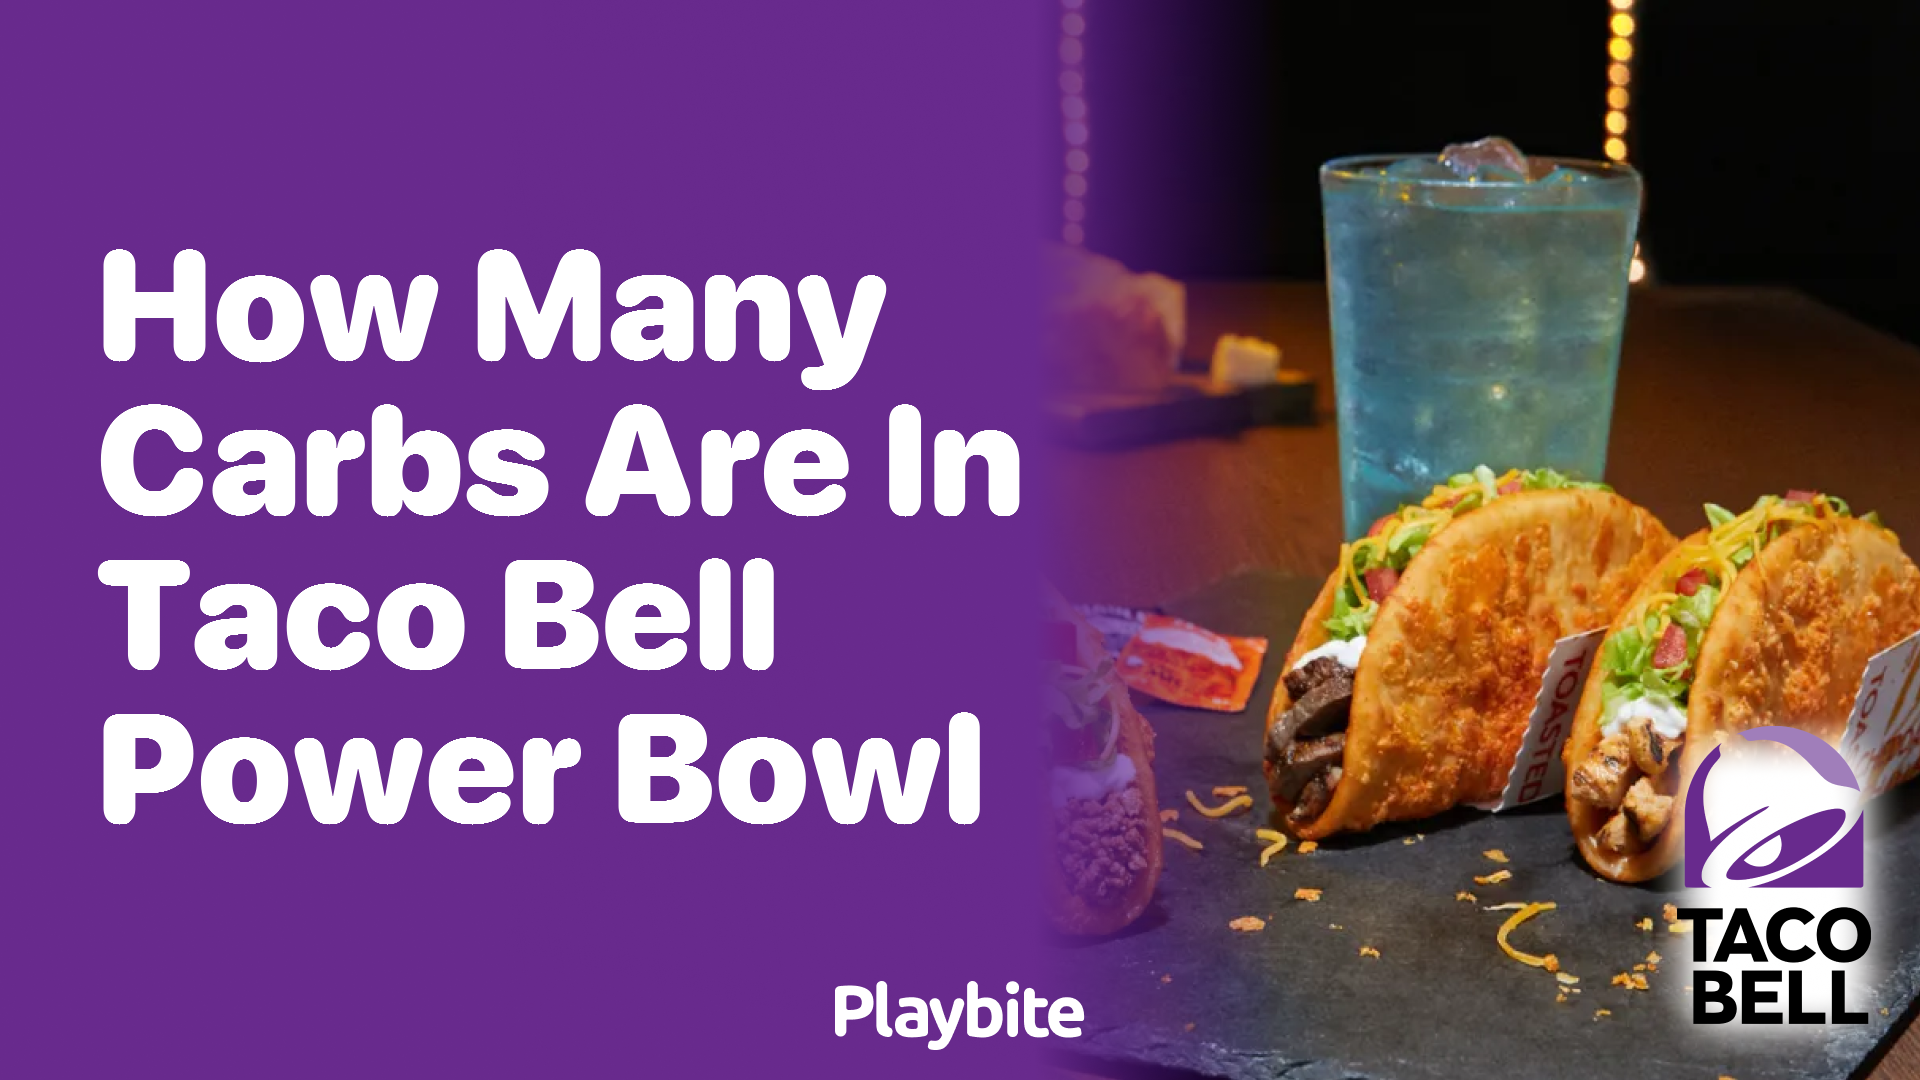 How Many Carbs Are in a Taco Bell Power Bowl?